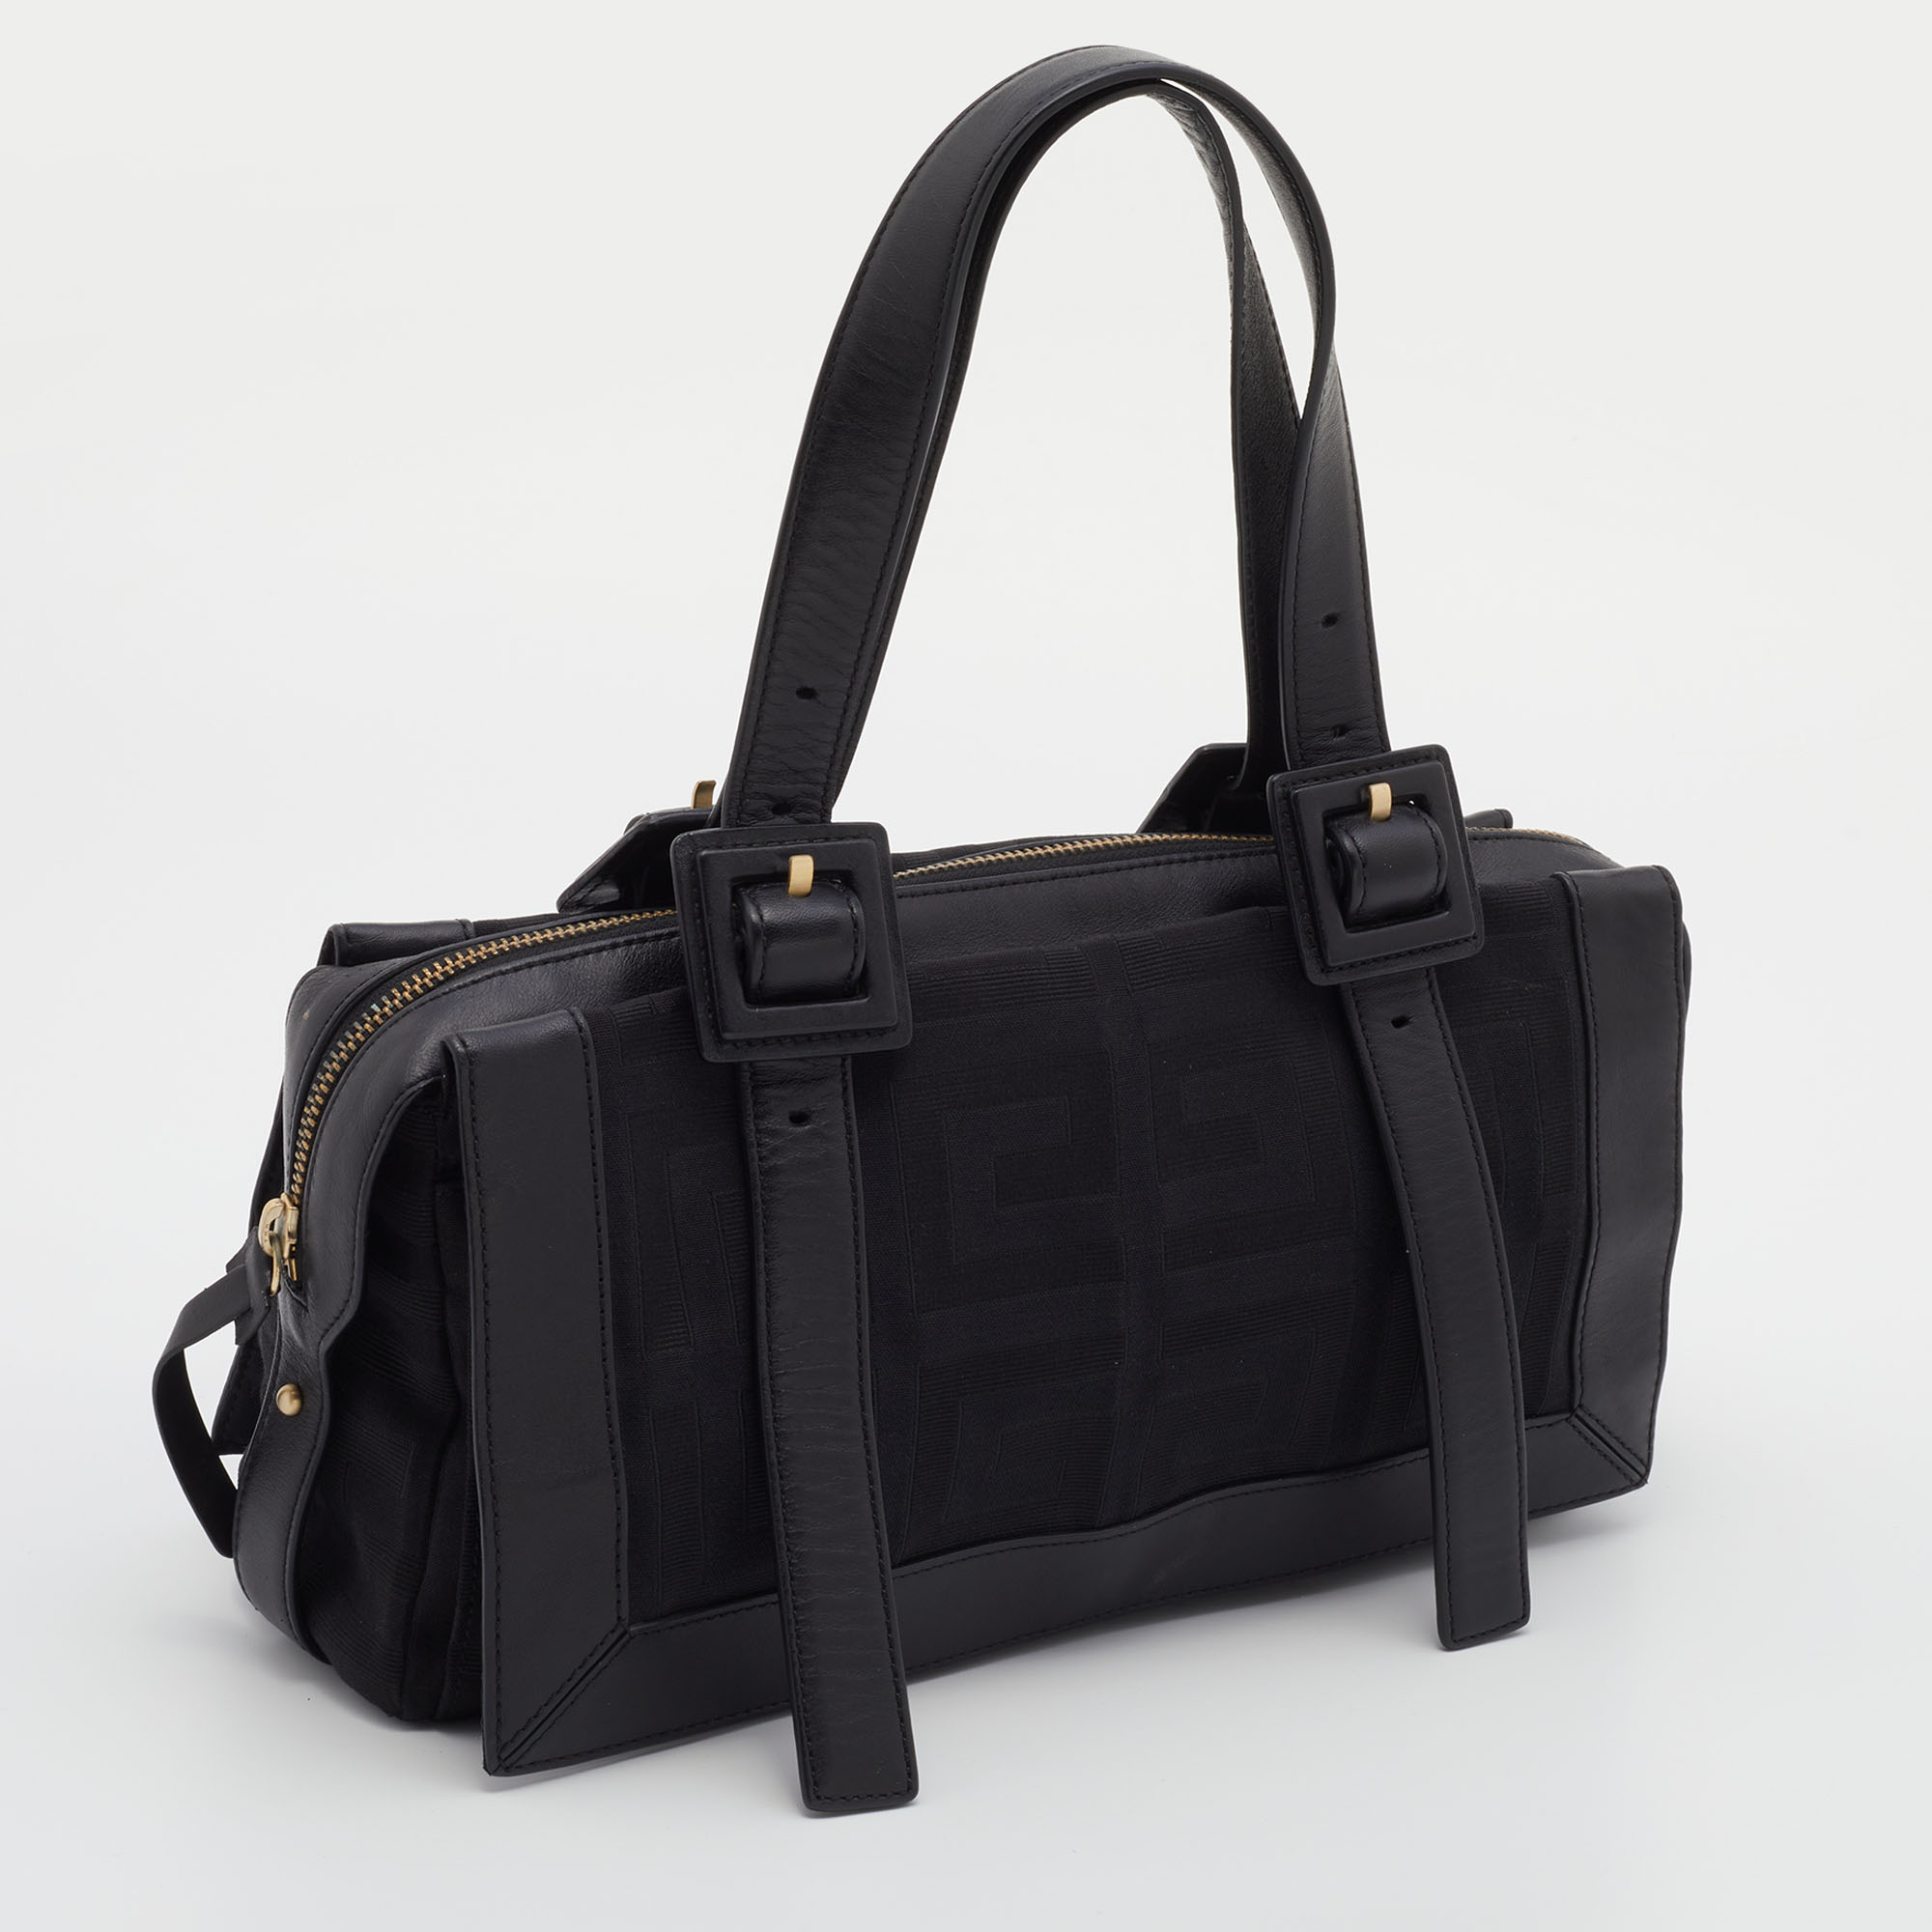 Givenchy Black Monogram Canvas And Leather Satchel